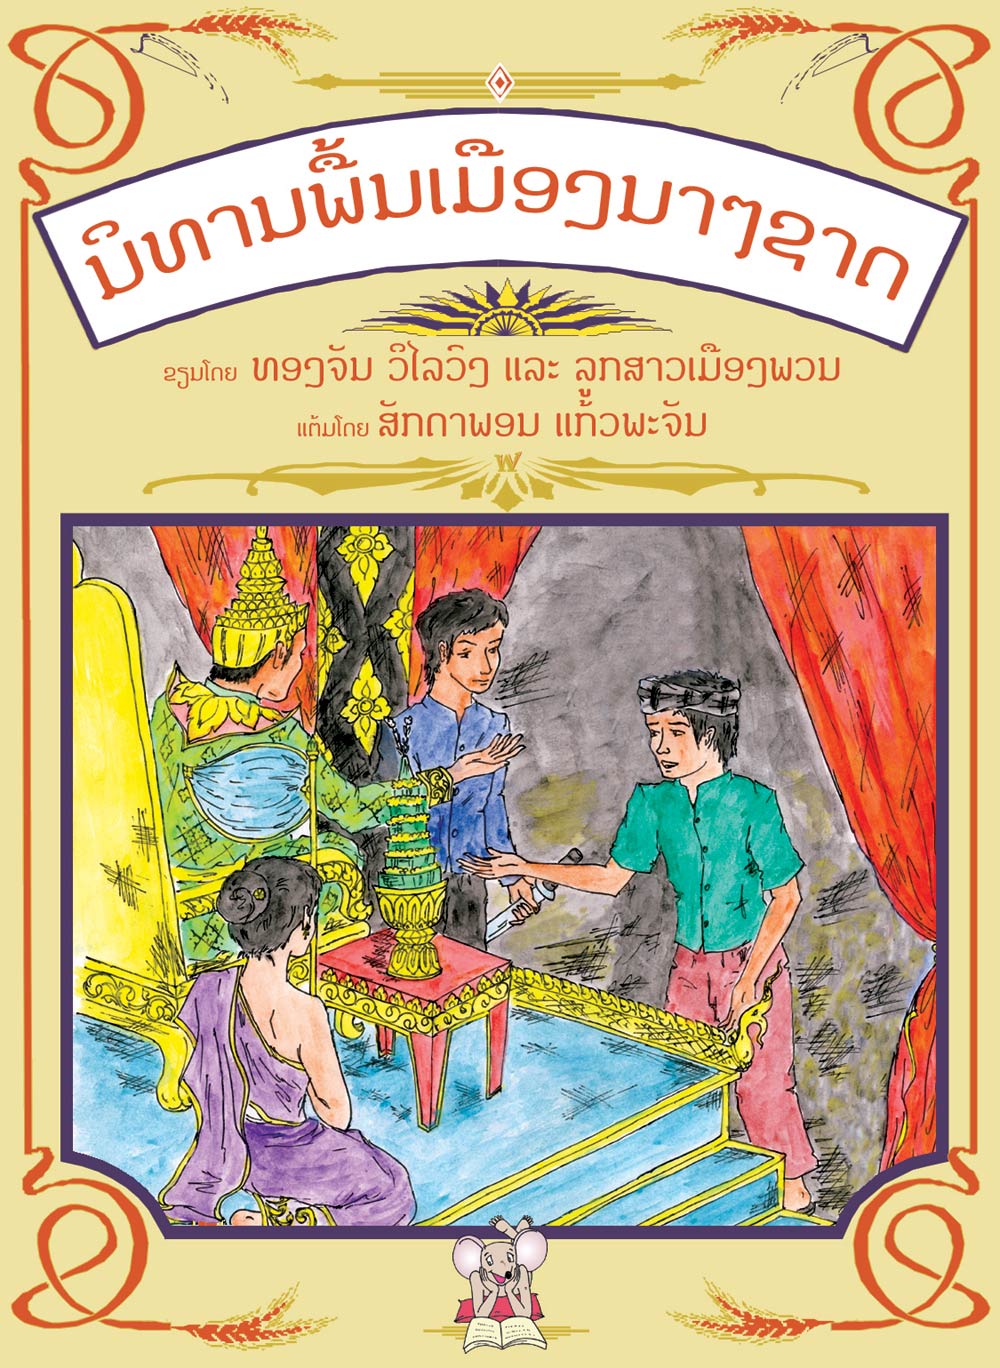 International Folktales large book cover, published in Lao language